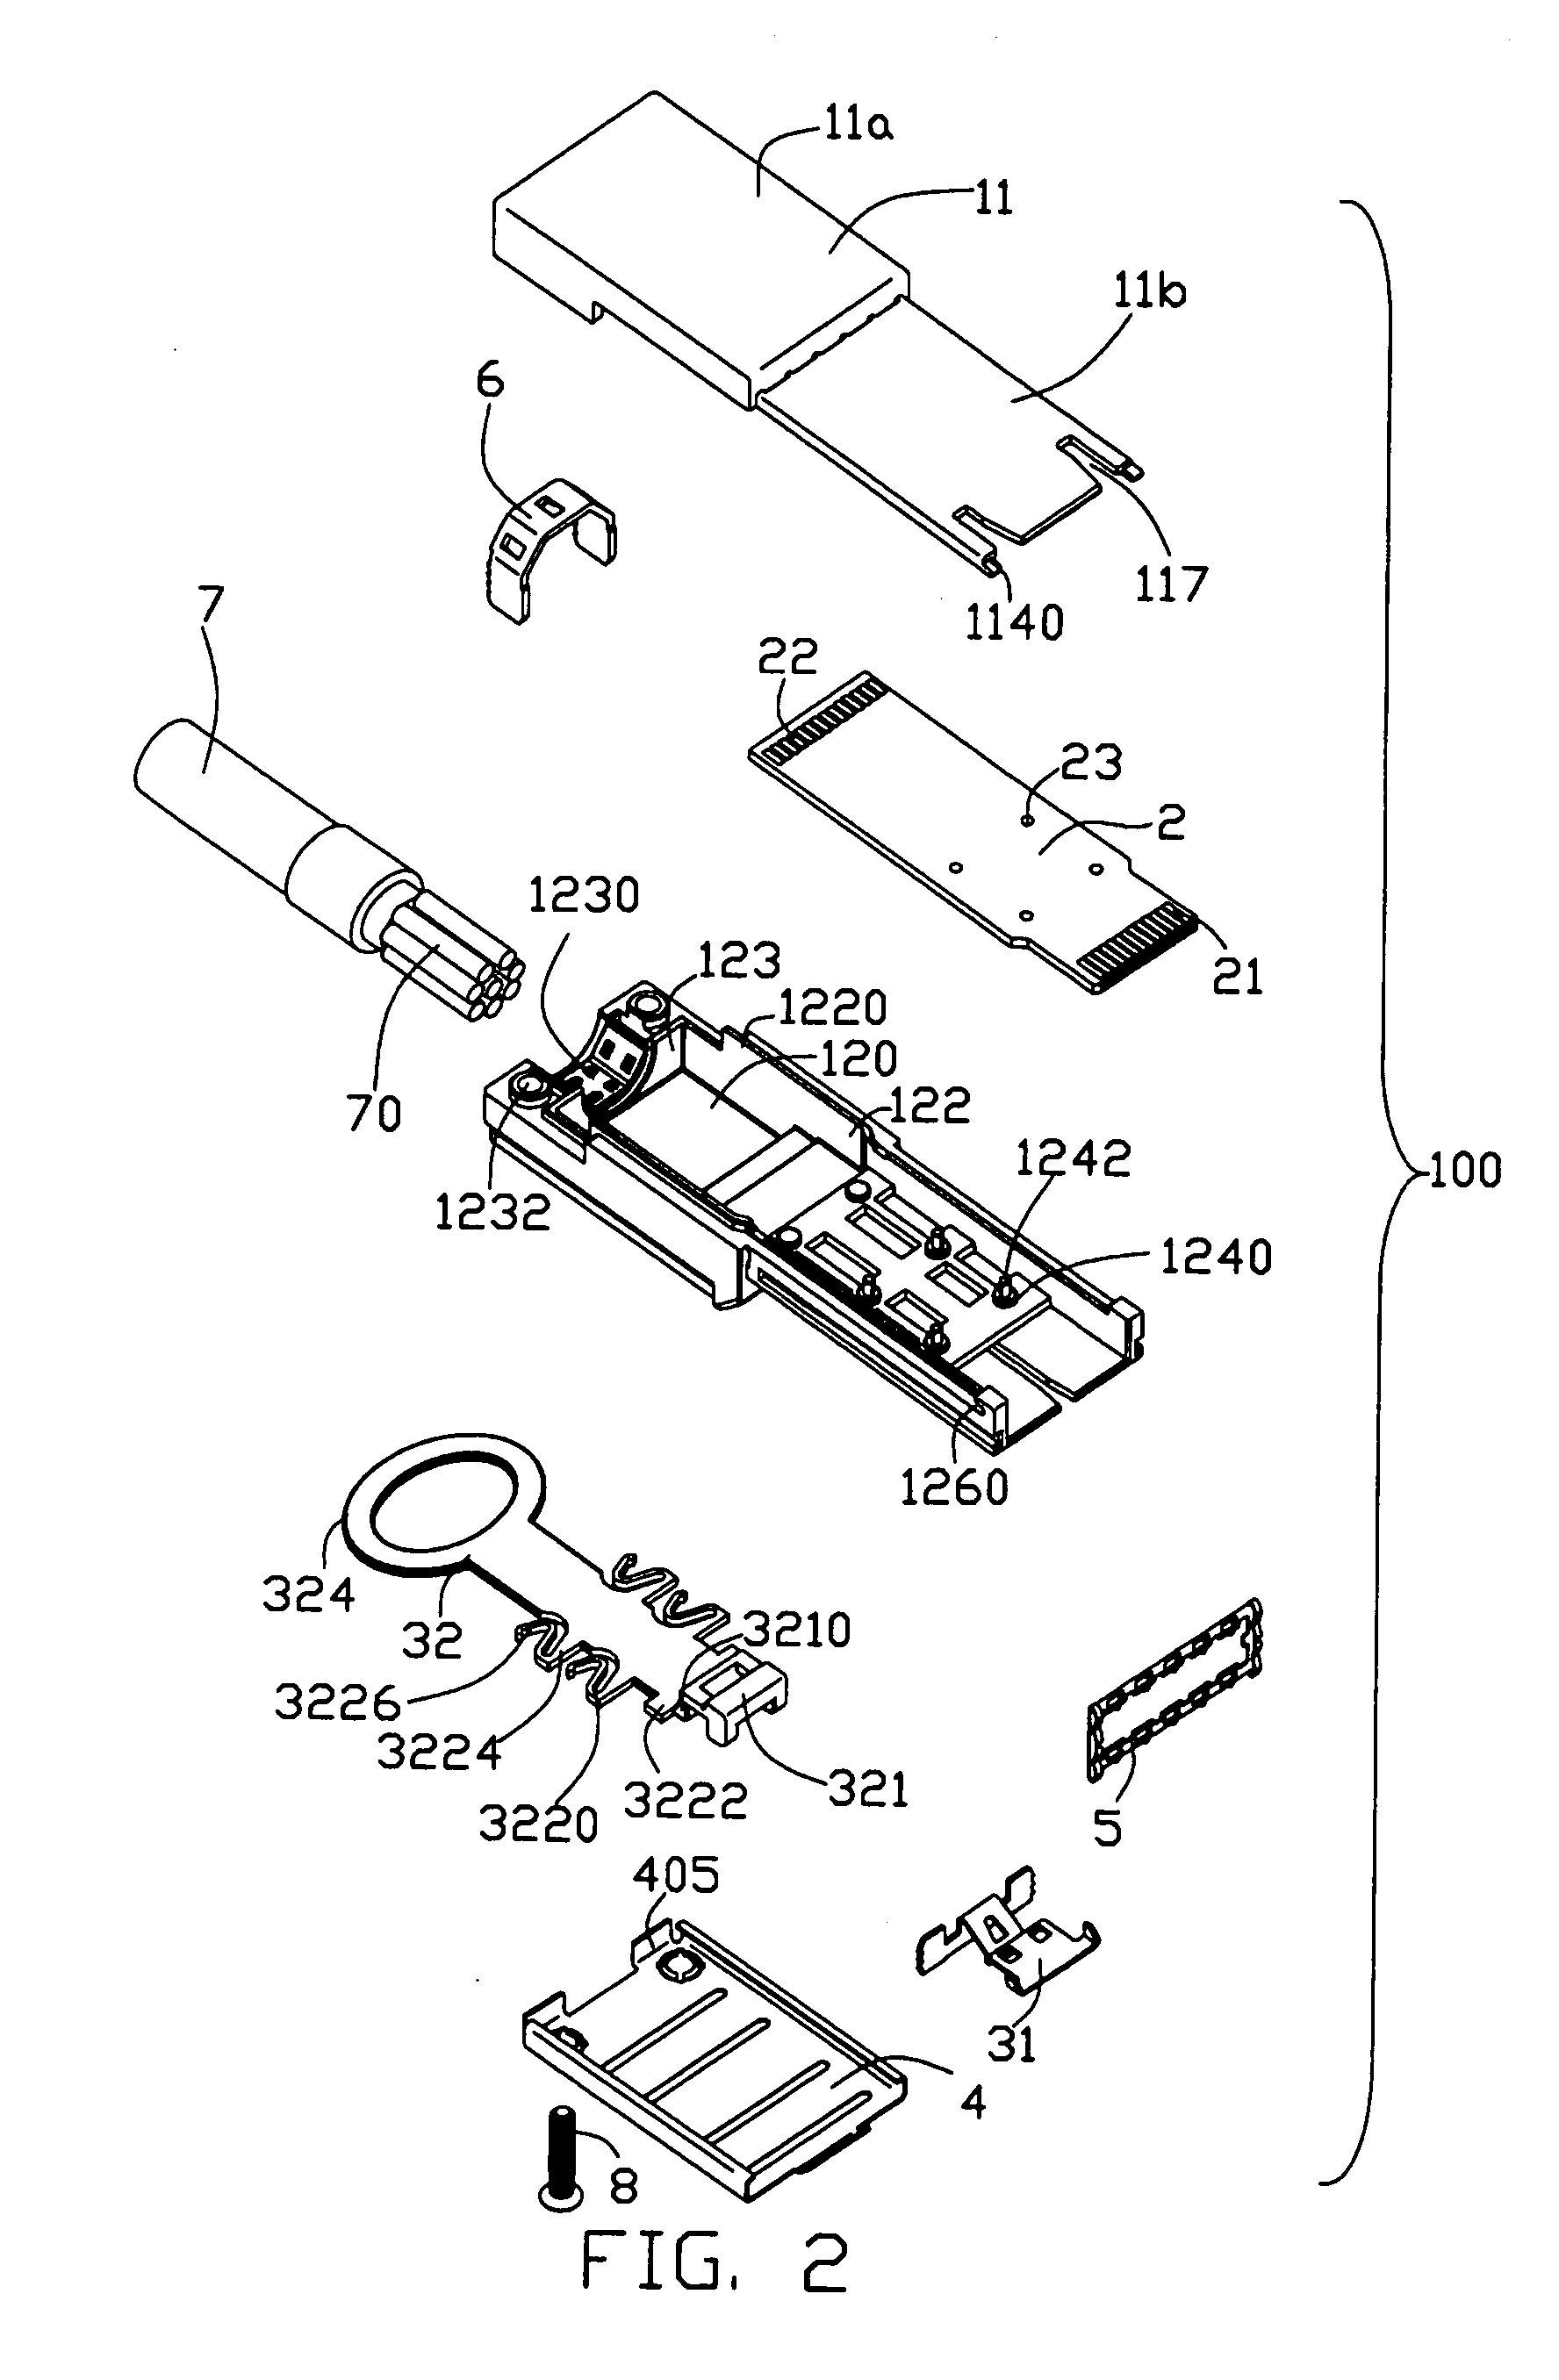 Cable connector assembly with EMI gasket